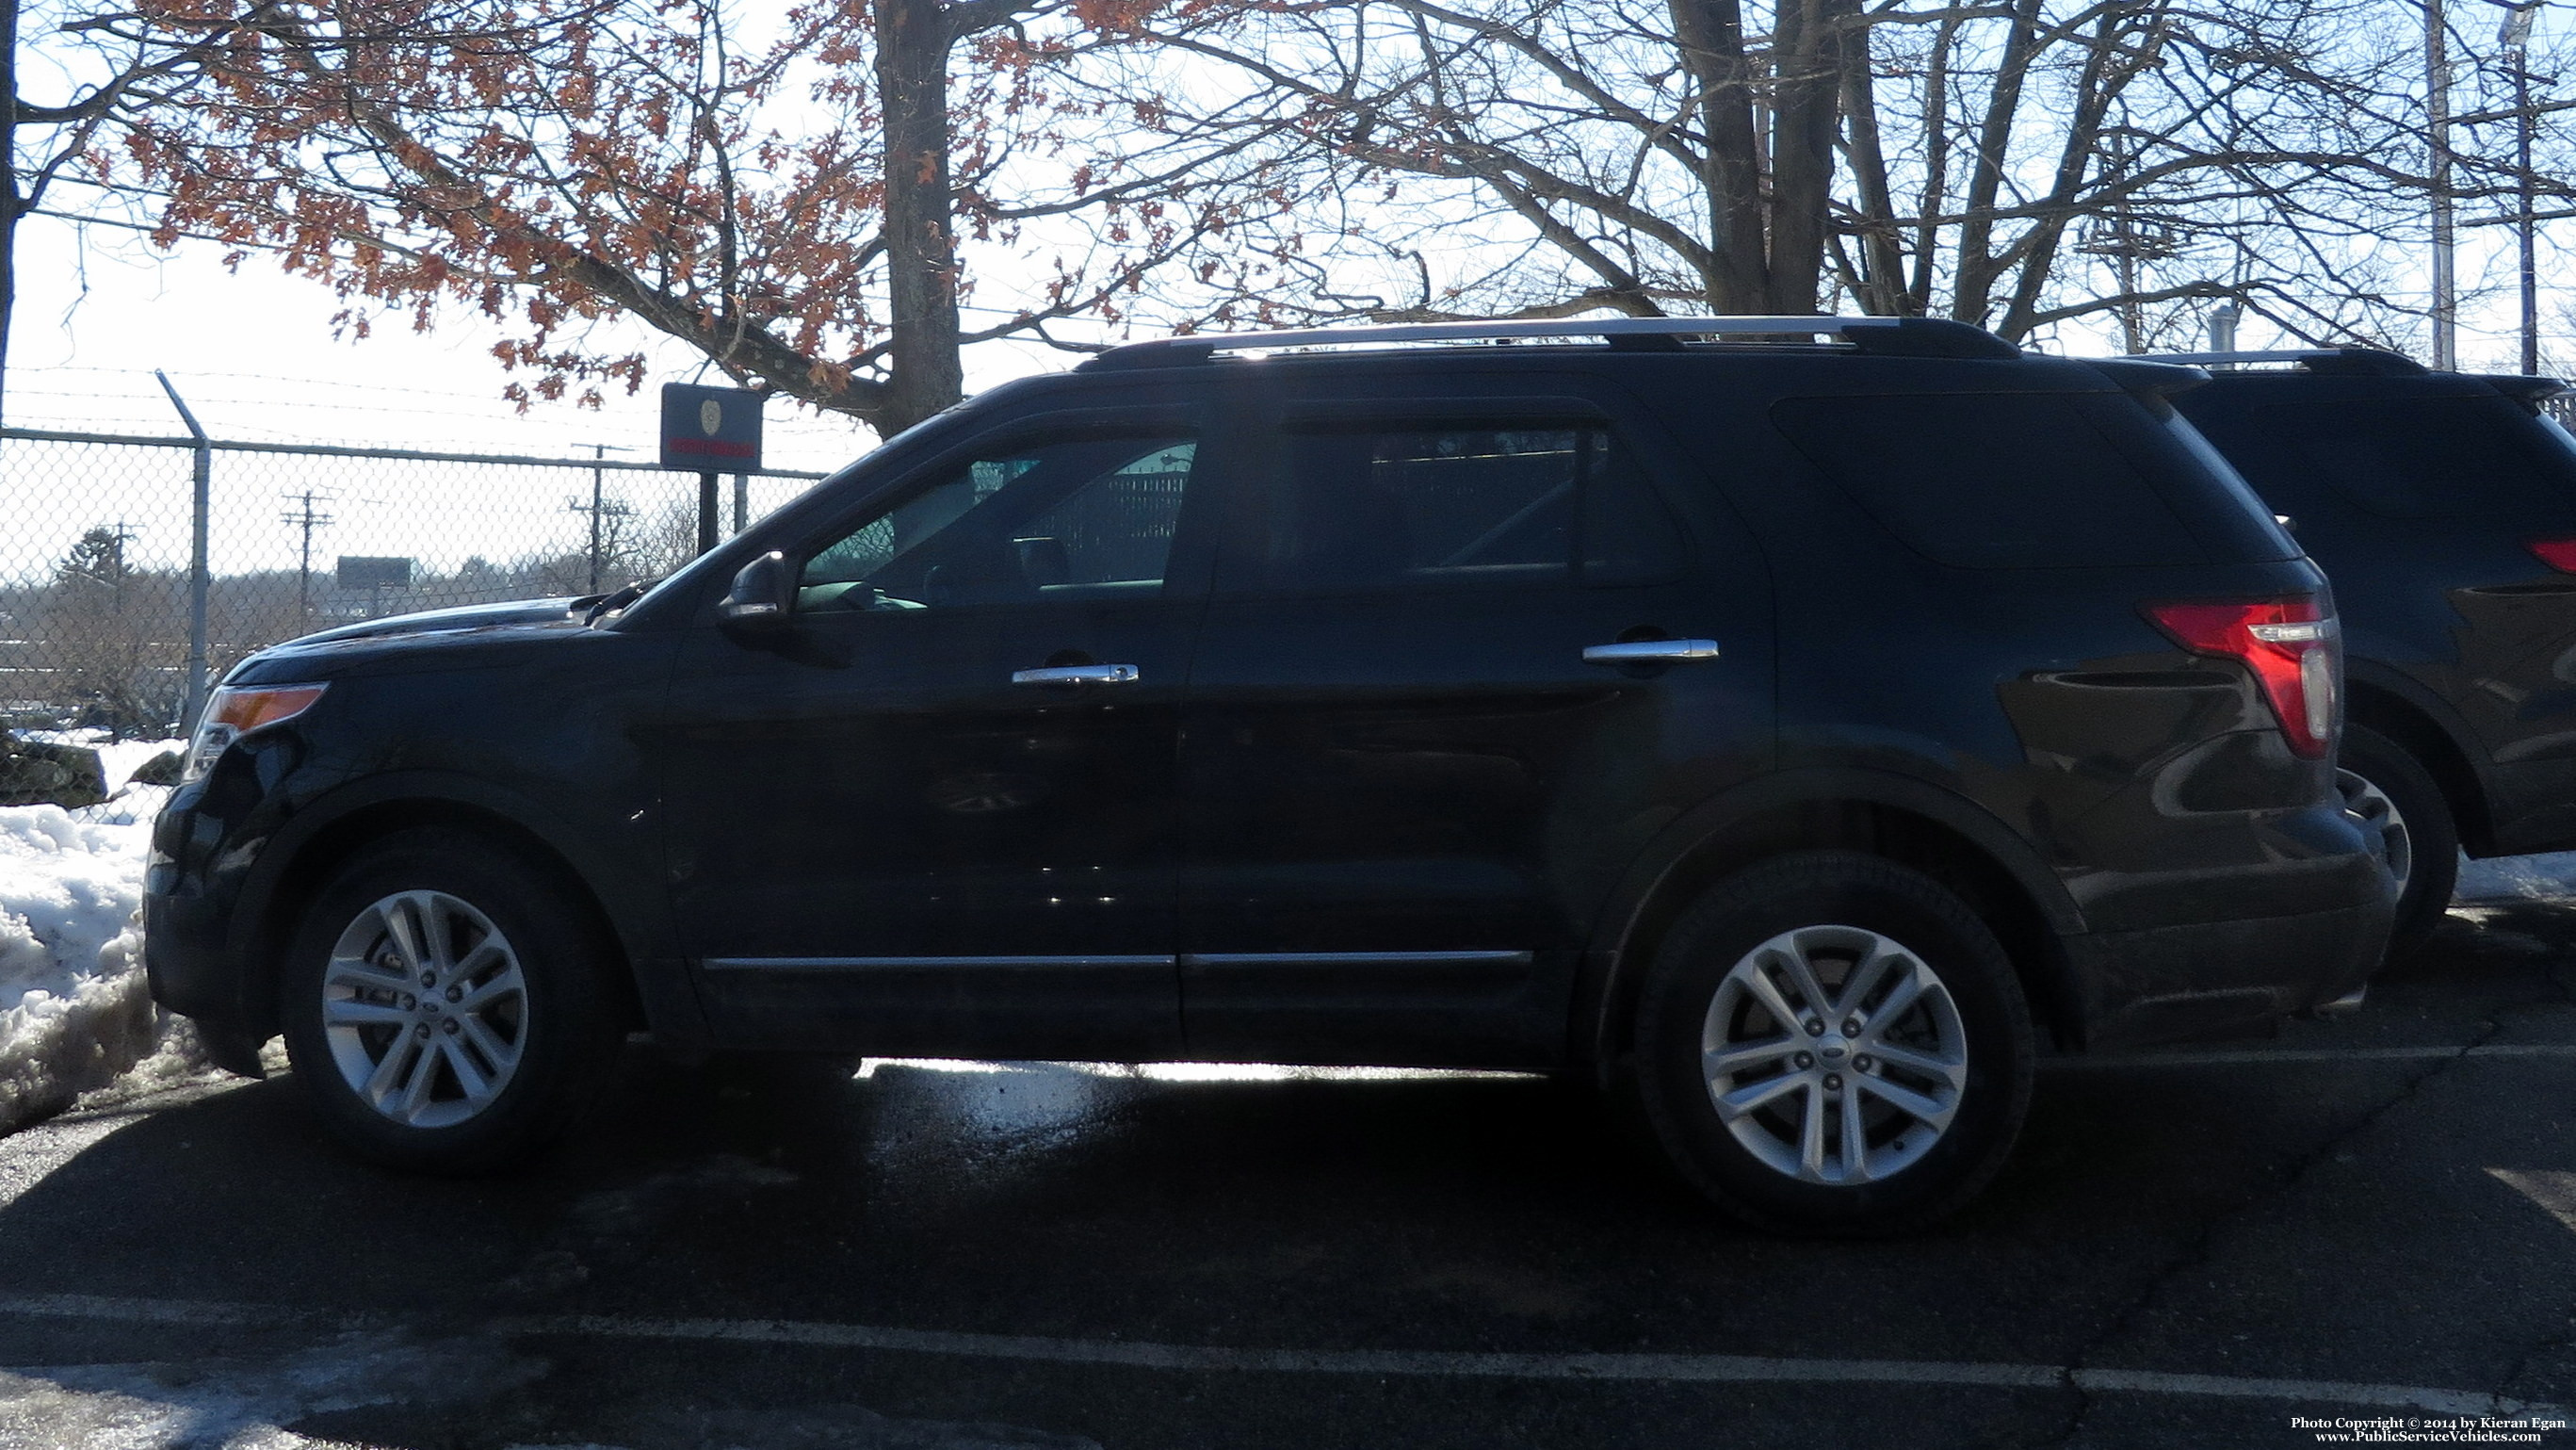 A photo  of East Providence Police
            Services Commander, a 2013 Ford Explorer             taken by Kieran Egan